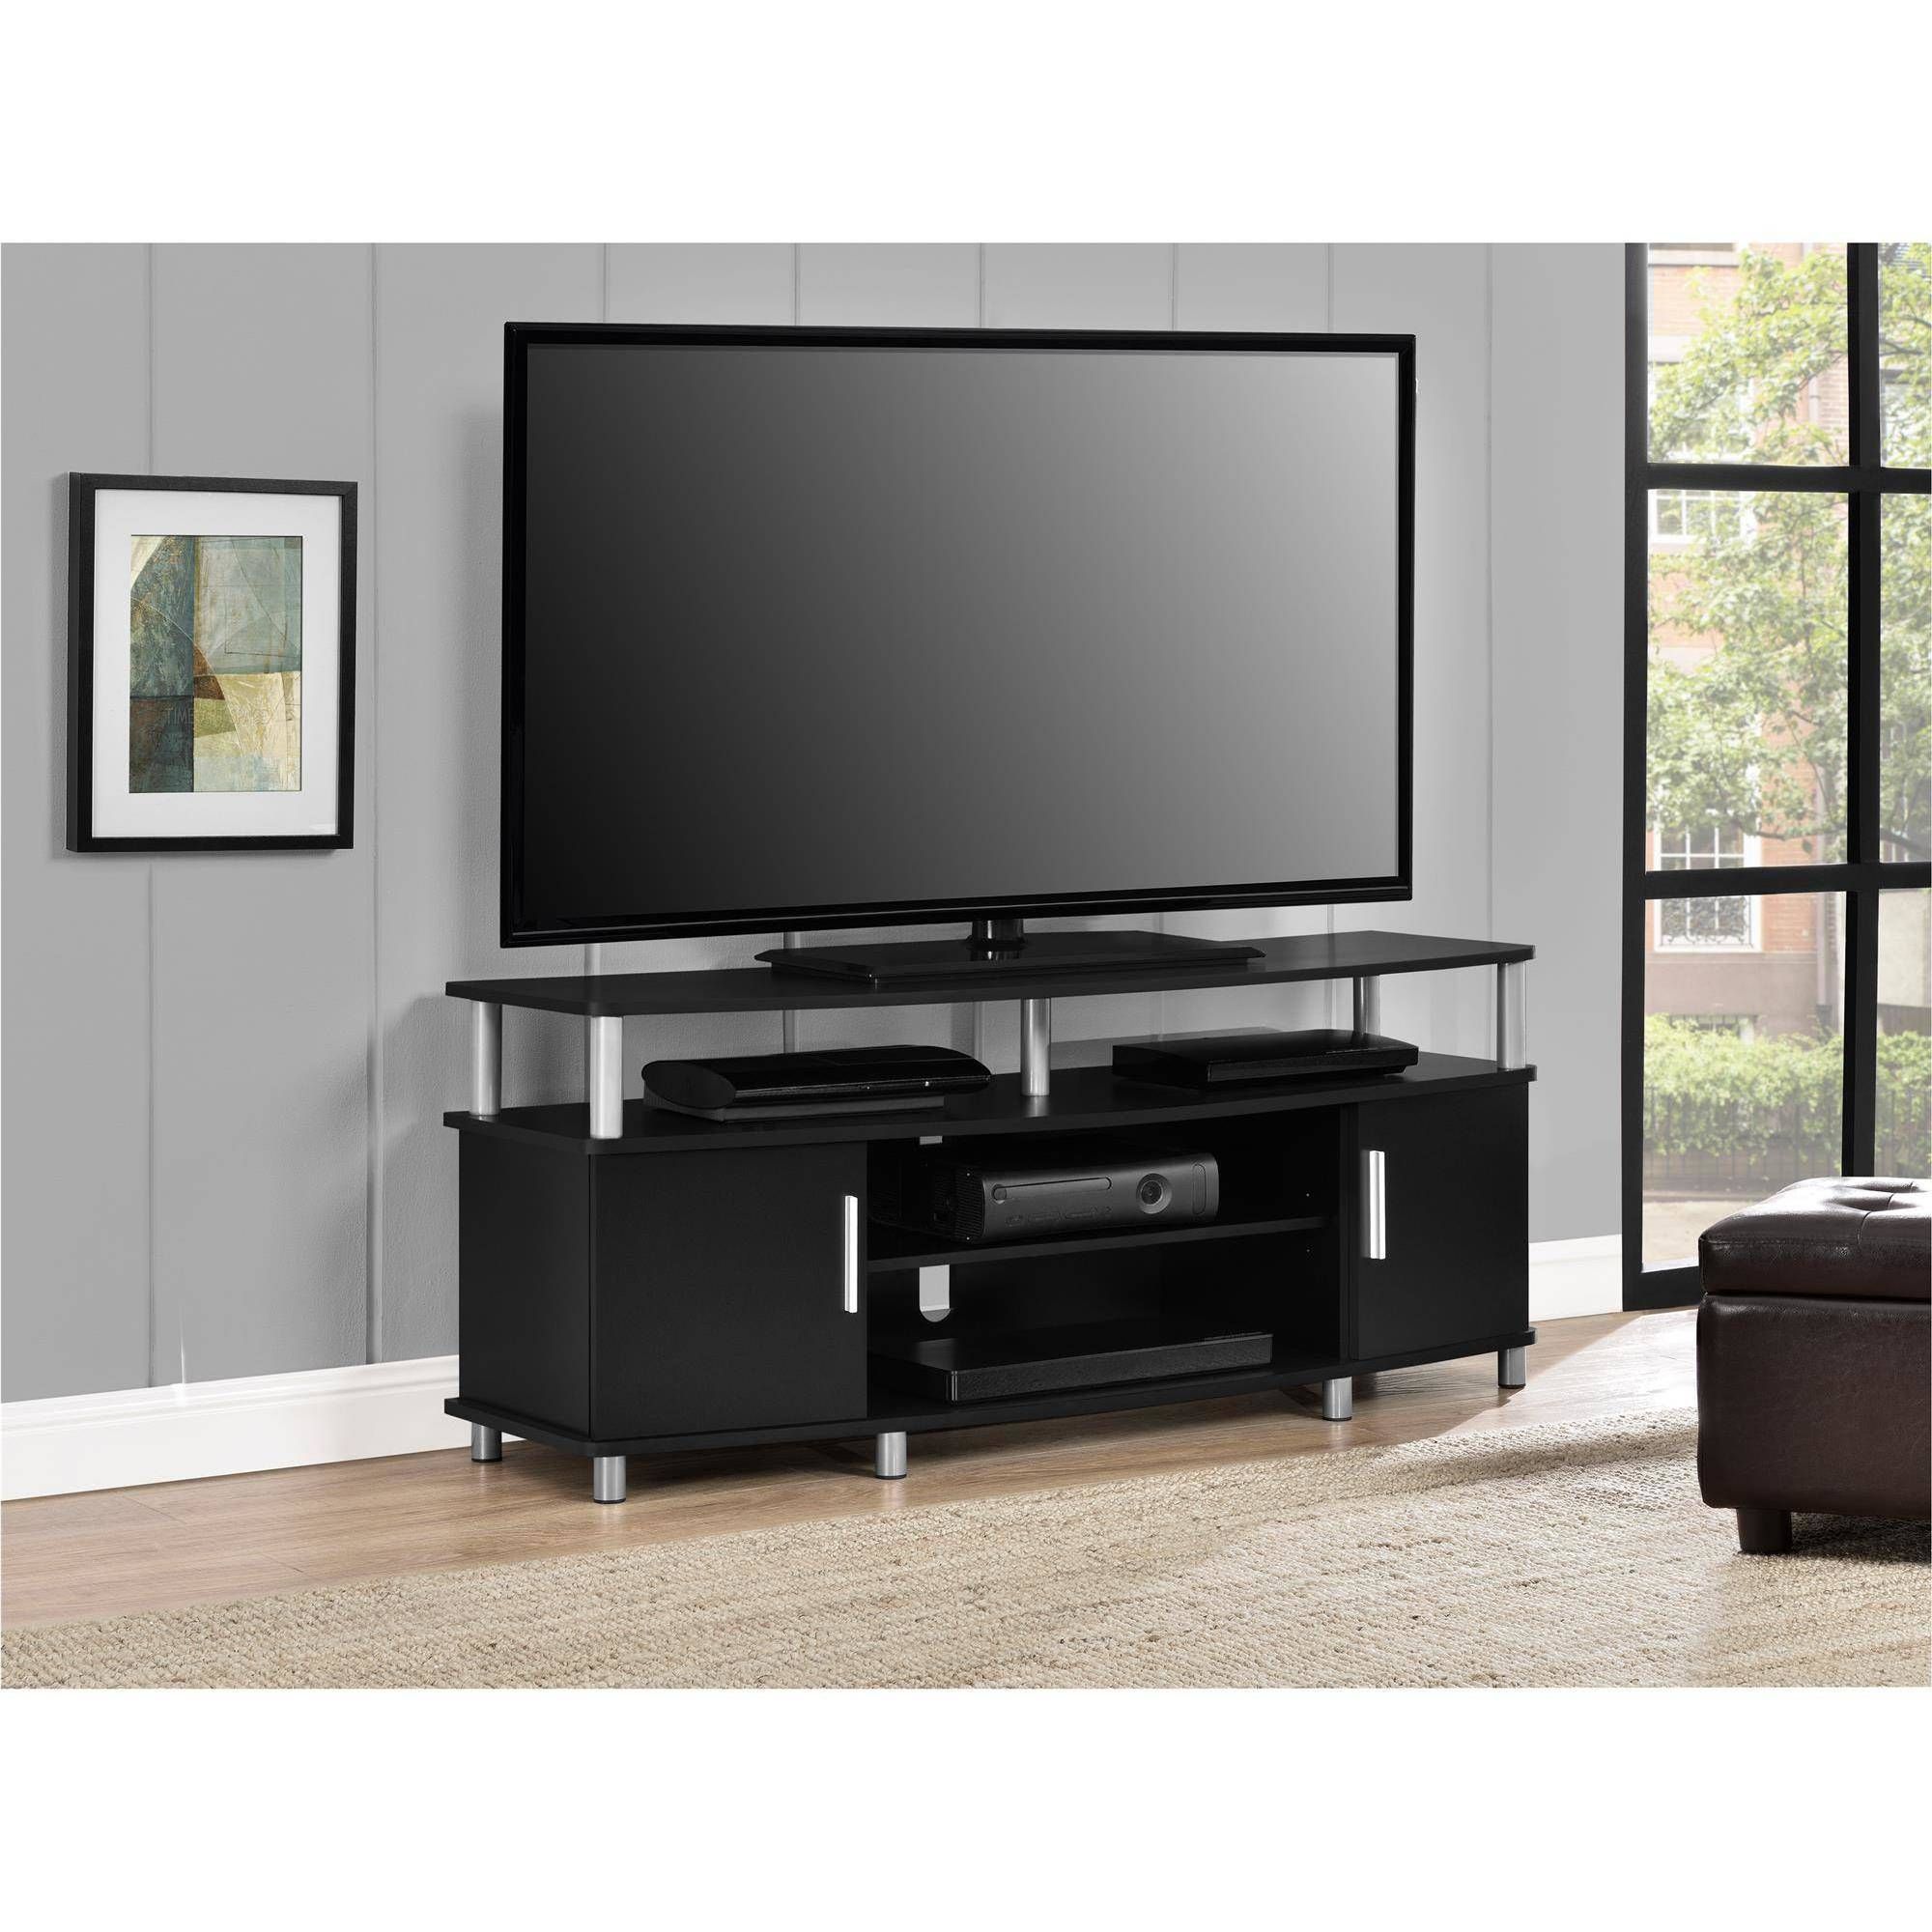 Carson Tv Stand For Tvs Up To 50" Wide, Black – Walmart Throughout Deco Wide Tv Stands (View 4 of 15)